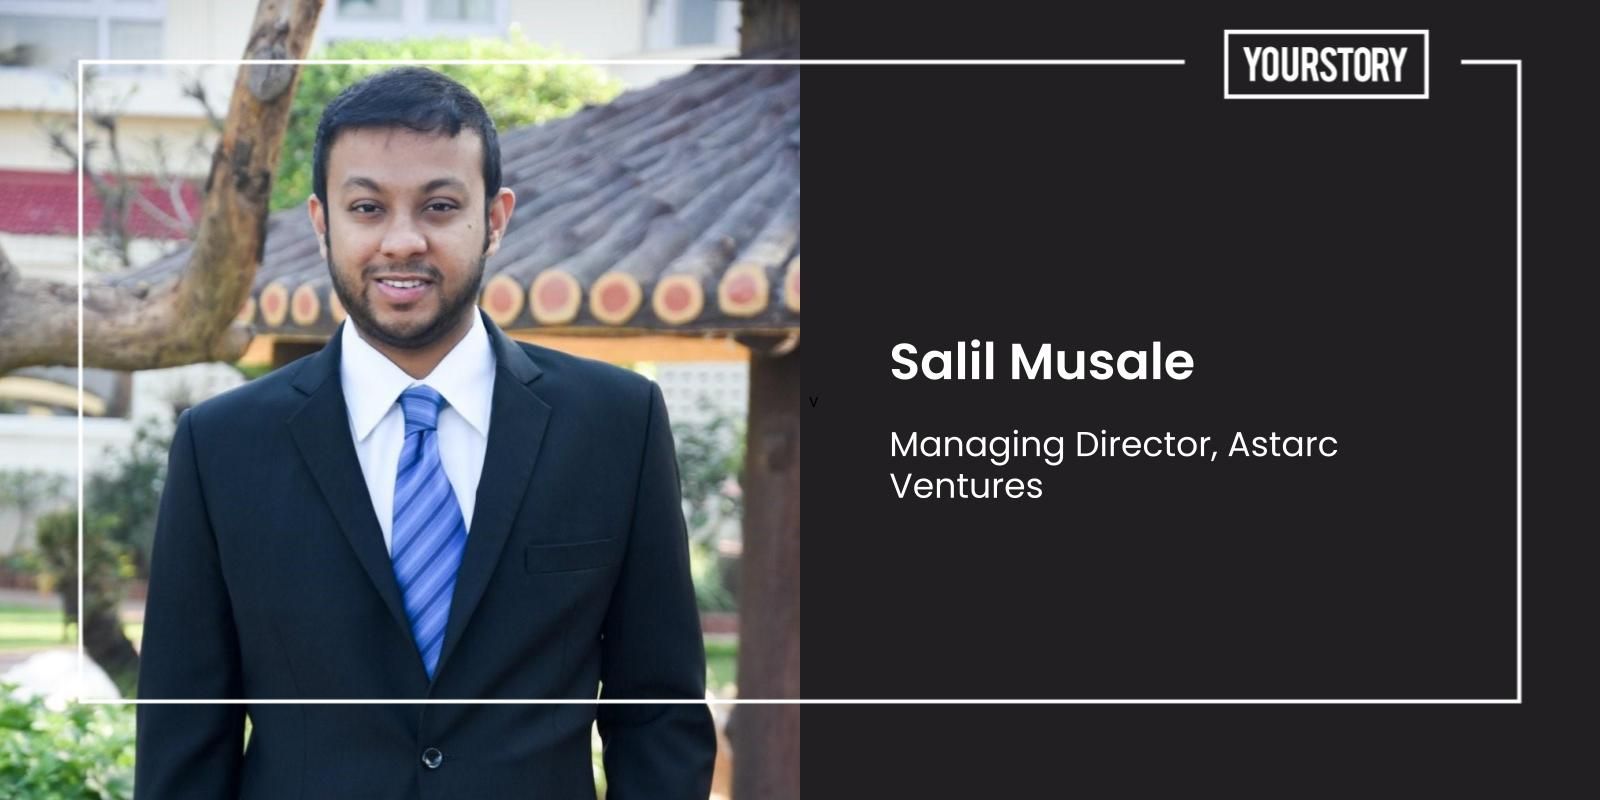 With CredR and Pharmeasy in its portfolio, Astarc Ventures’ Salil Musale on investing in startups
